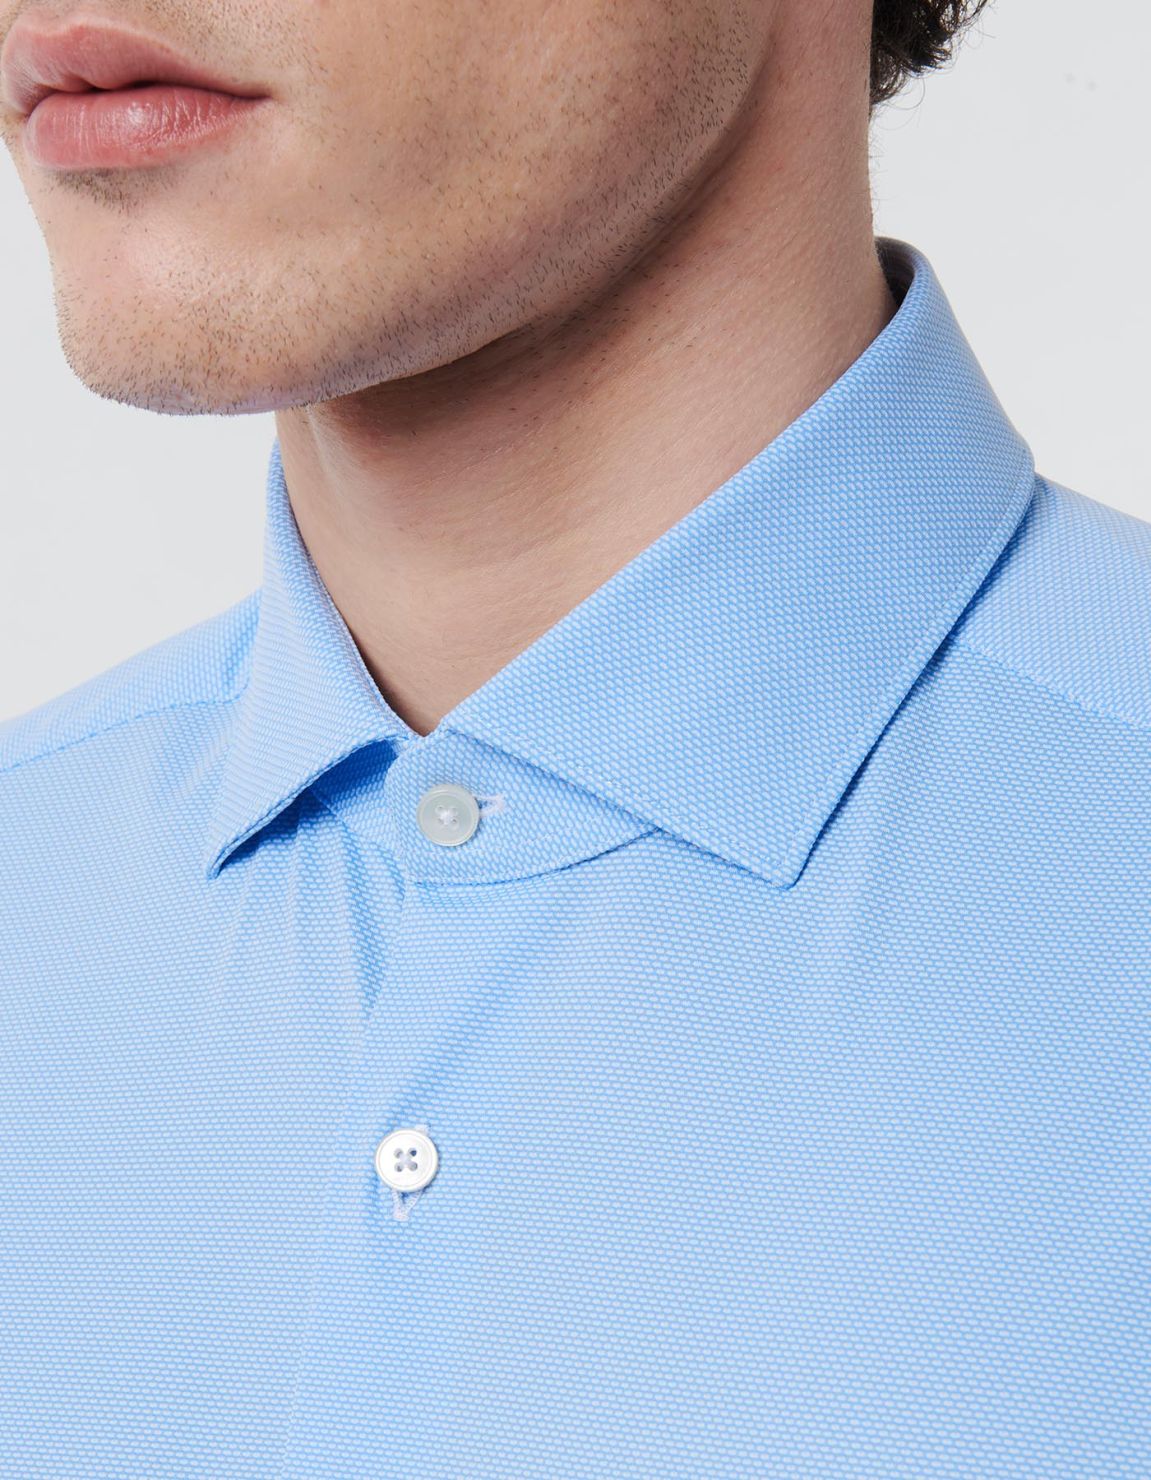 Light Blue Textured Solid colour Shirt Collar small cutaway Slim Fit 2